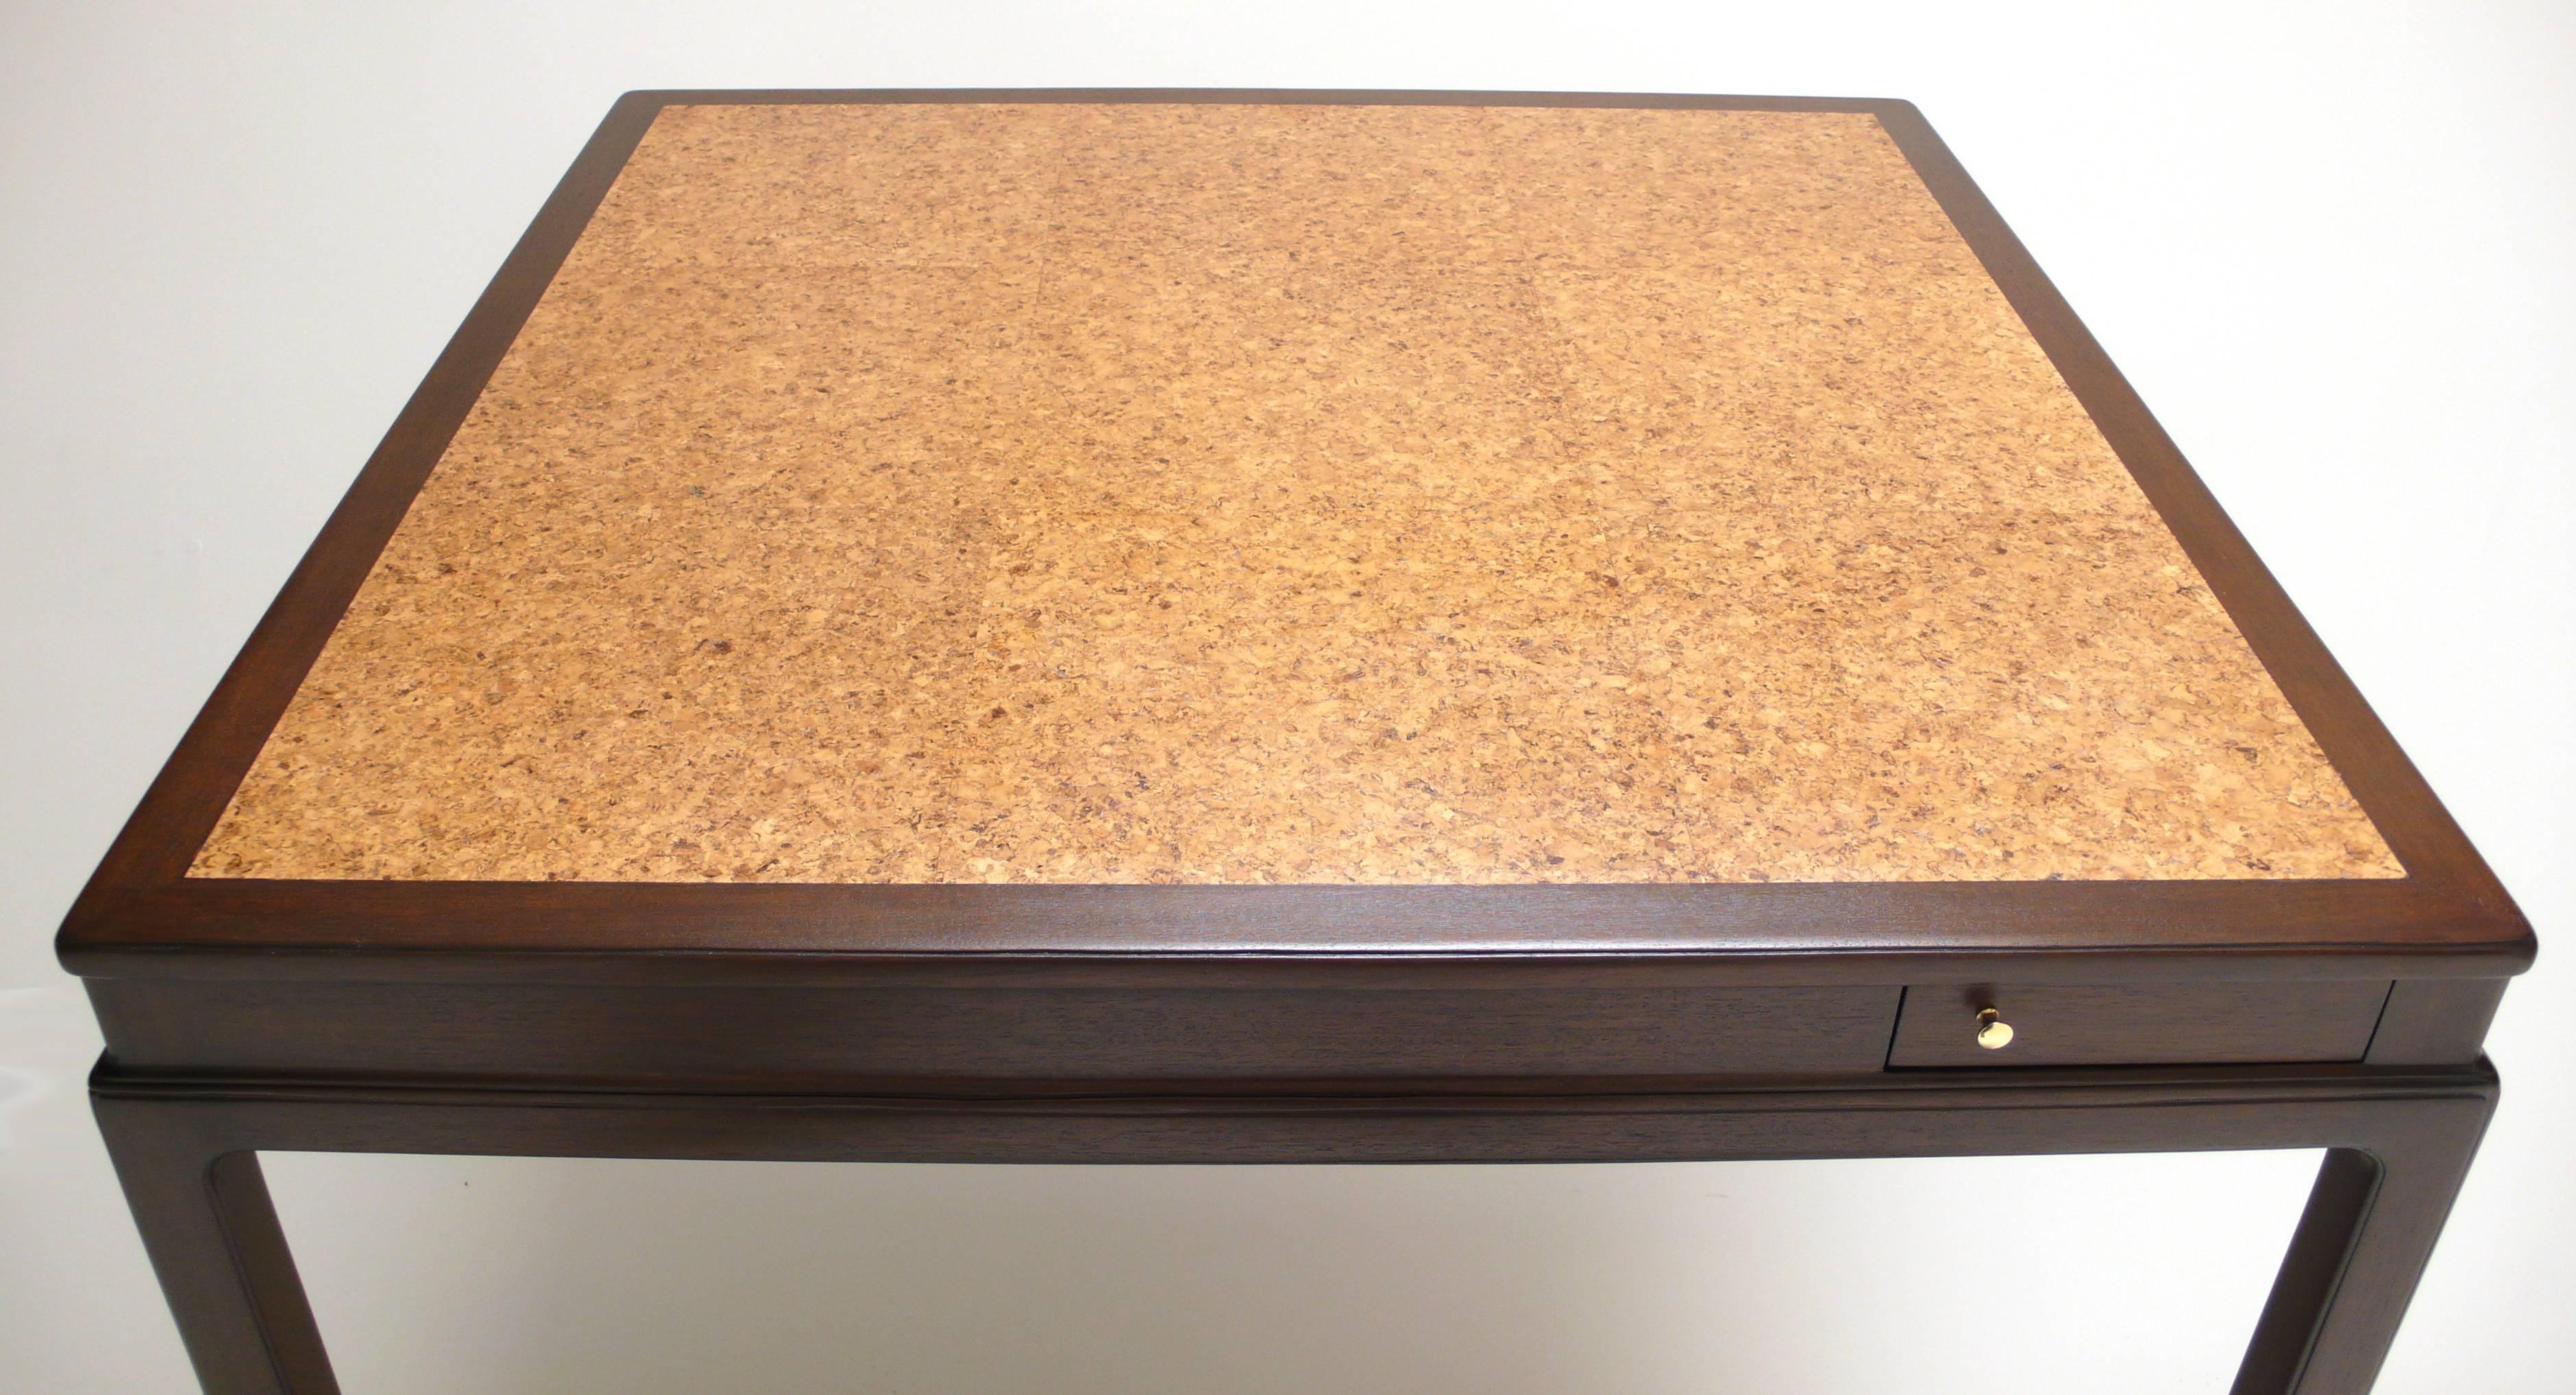 Dunbar game table with flip out coaster drawers with cork lining. The natural cork top has a new wax finish and is quite complementary to the espresso finished mahogany. An elegant piece in exceptional condition.